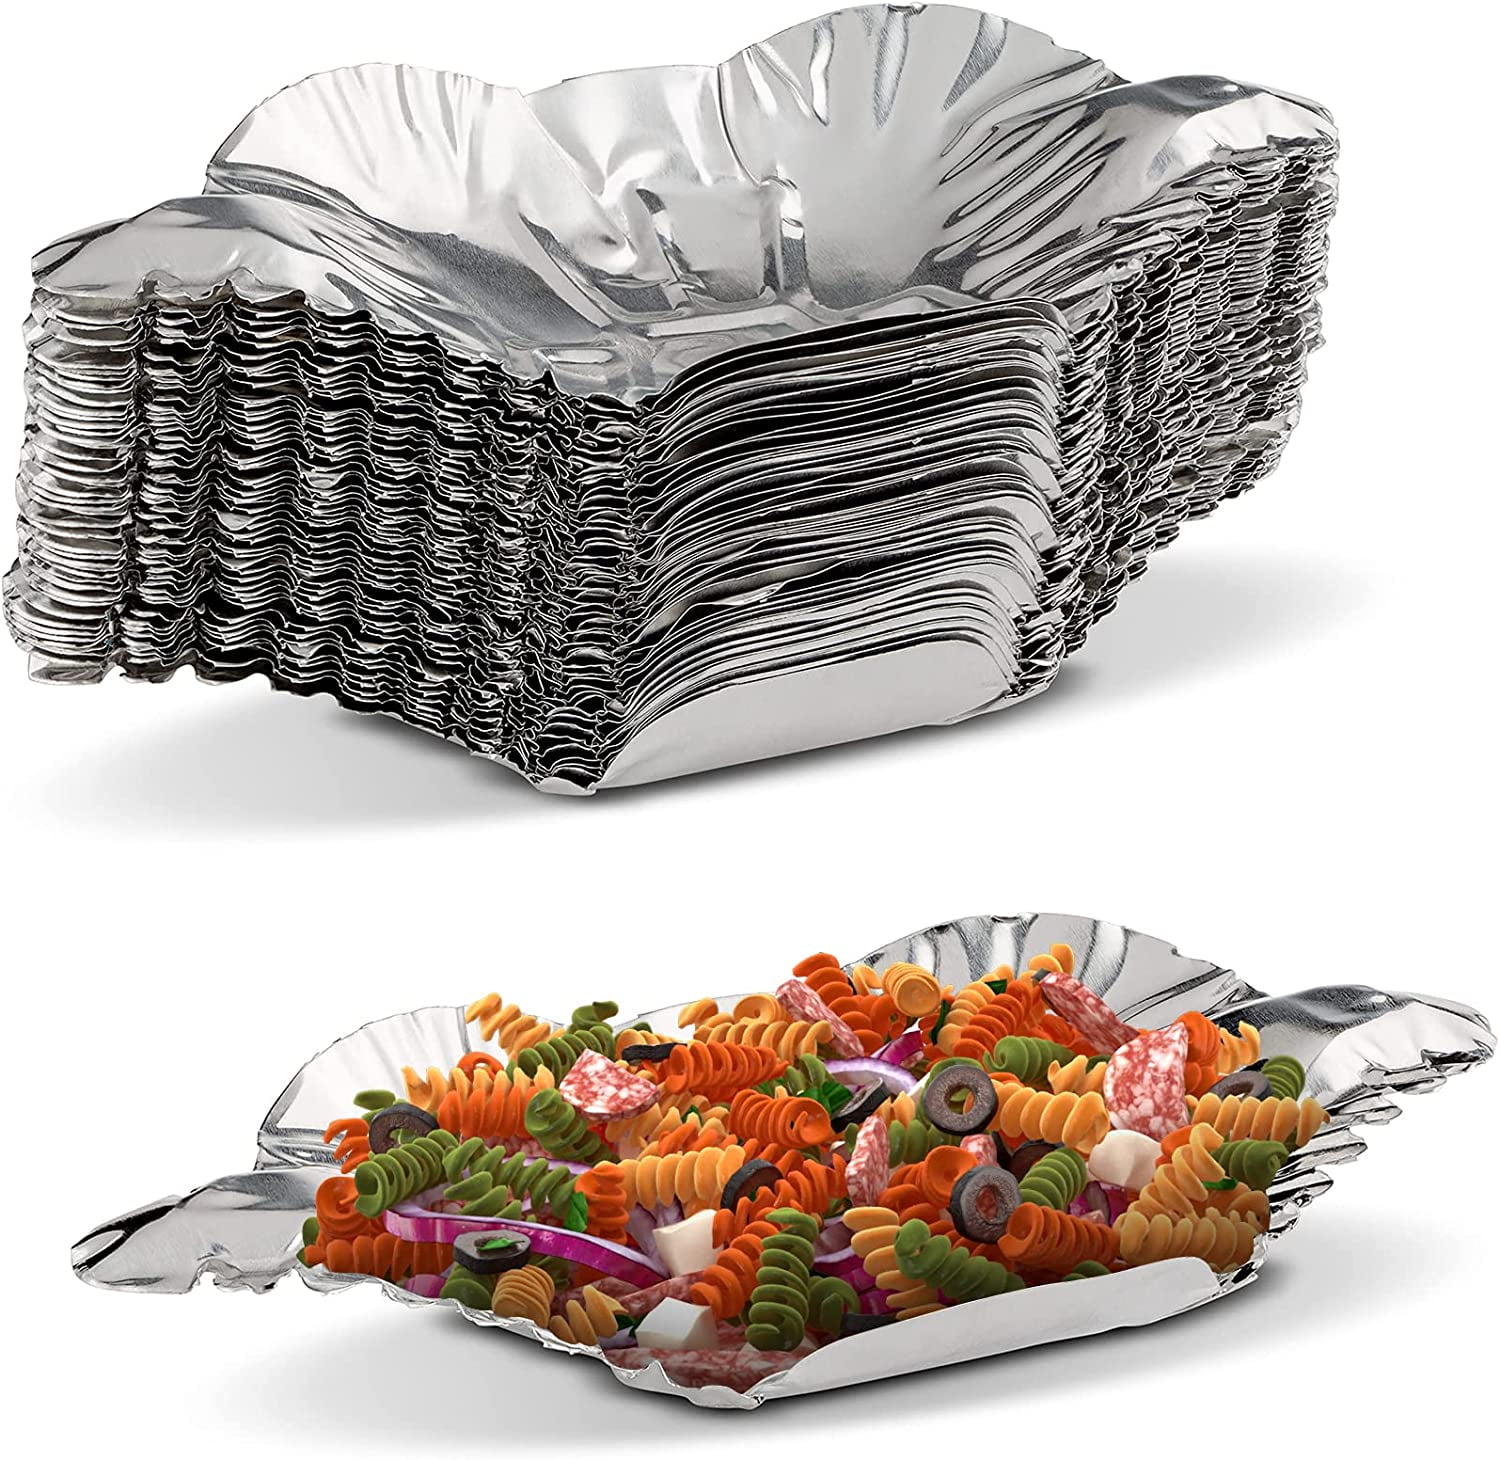 Diplastible 2.25 Pounds Disposable Aluminum Foil Pans with Lids | Oblong  Cookware Pans Best Use for Baking, Meal Preparations, Cooking